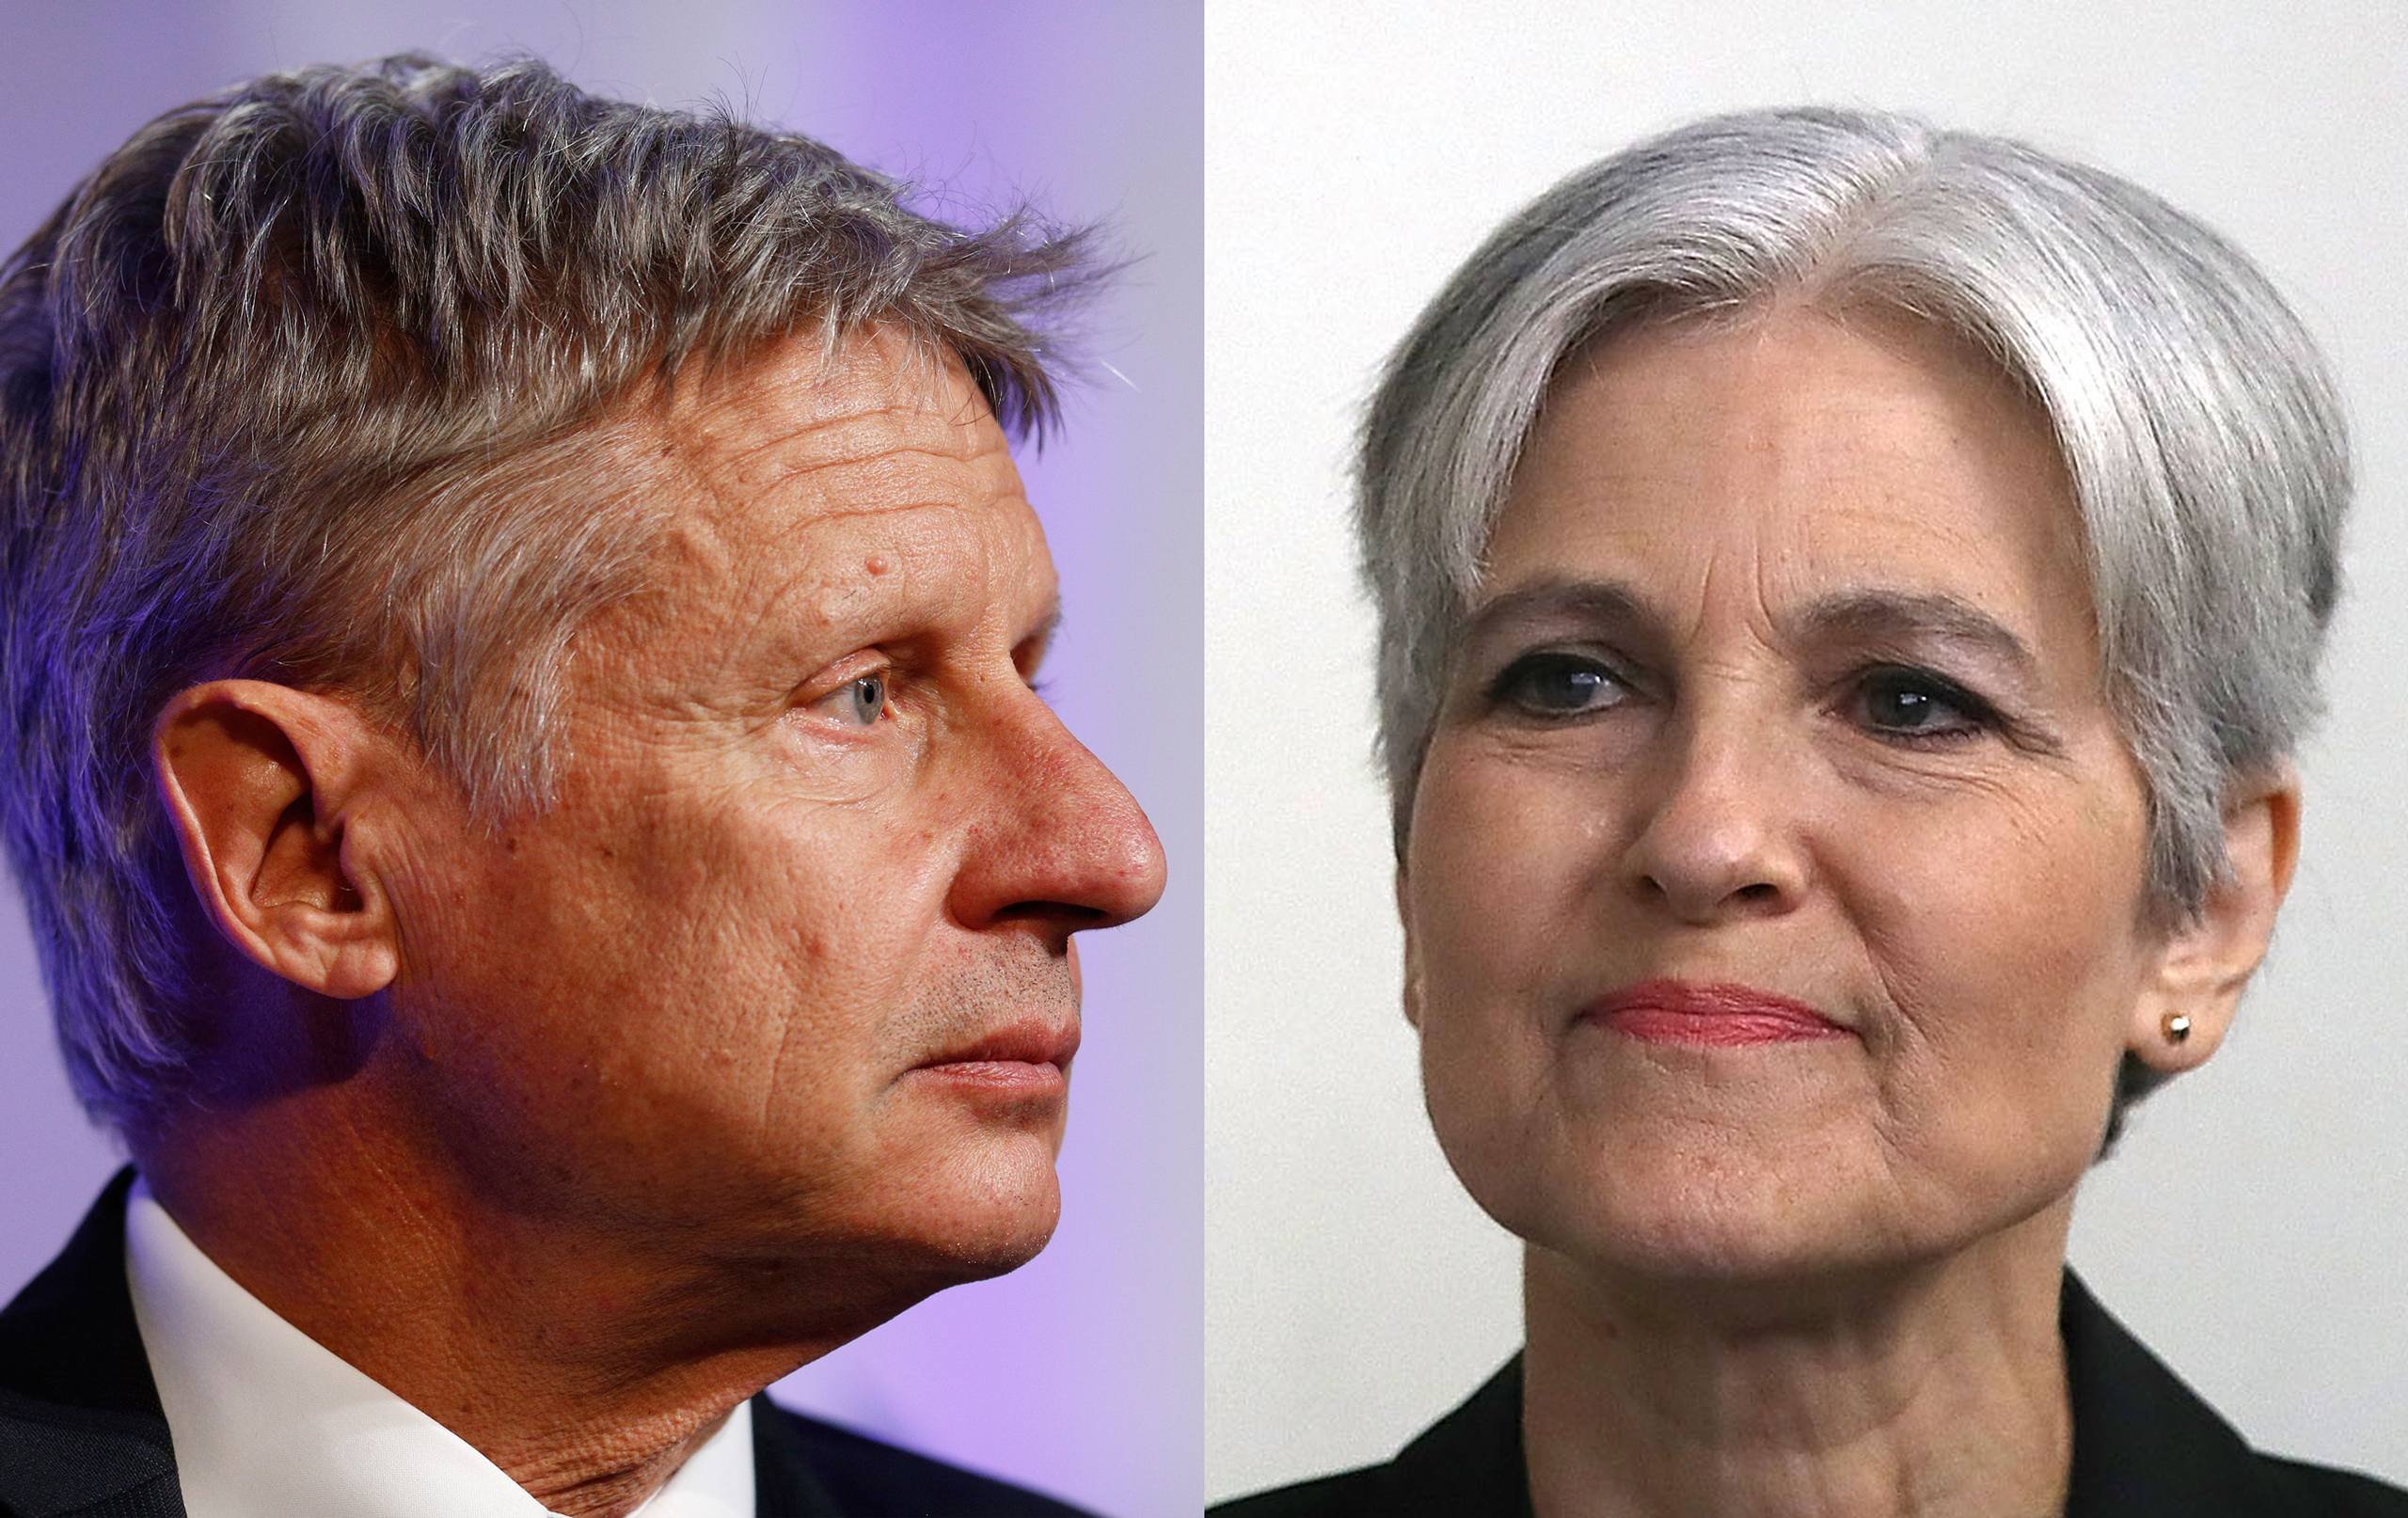 Gary Johnson, left, during a campaign event at Purdue University in West Lafayette, Ind., on Sept. 13, 2016; Jill Stein, right, prior to a press conference at the National Press Club in Washington, D.C., on Aug. 23, 2016 (Luke Sharrett—Bloomberg/Getty Images;Win McNamee—Getty Images)